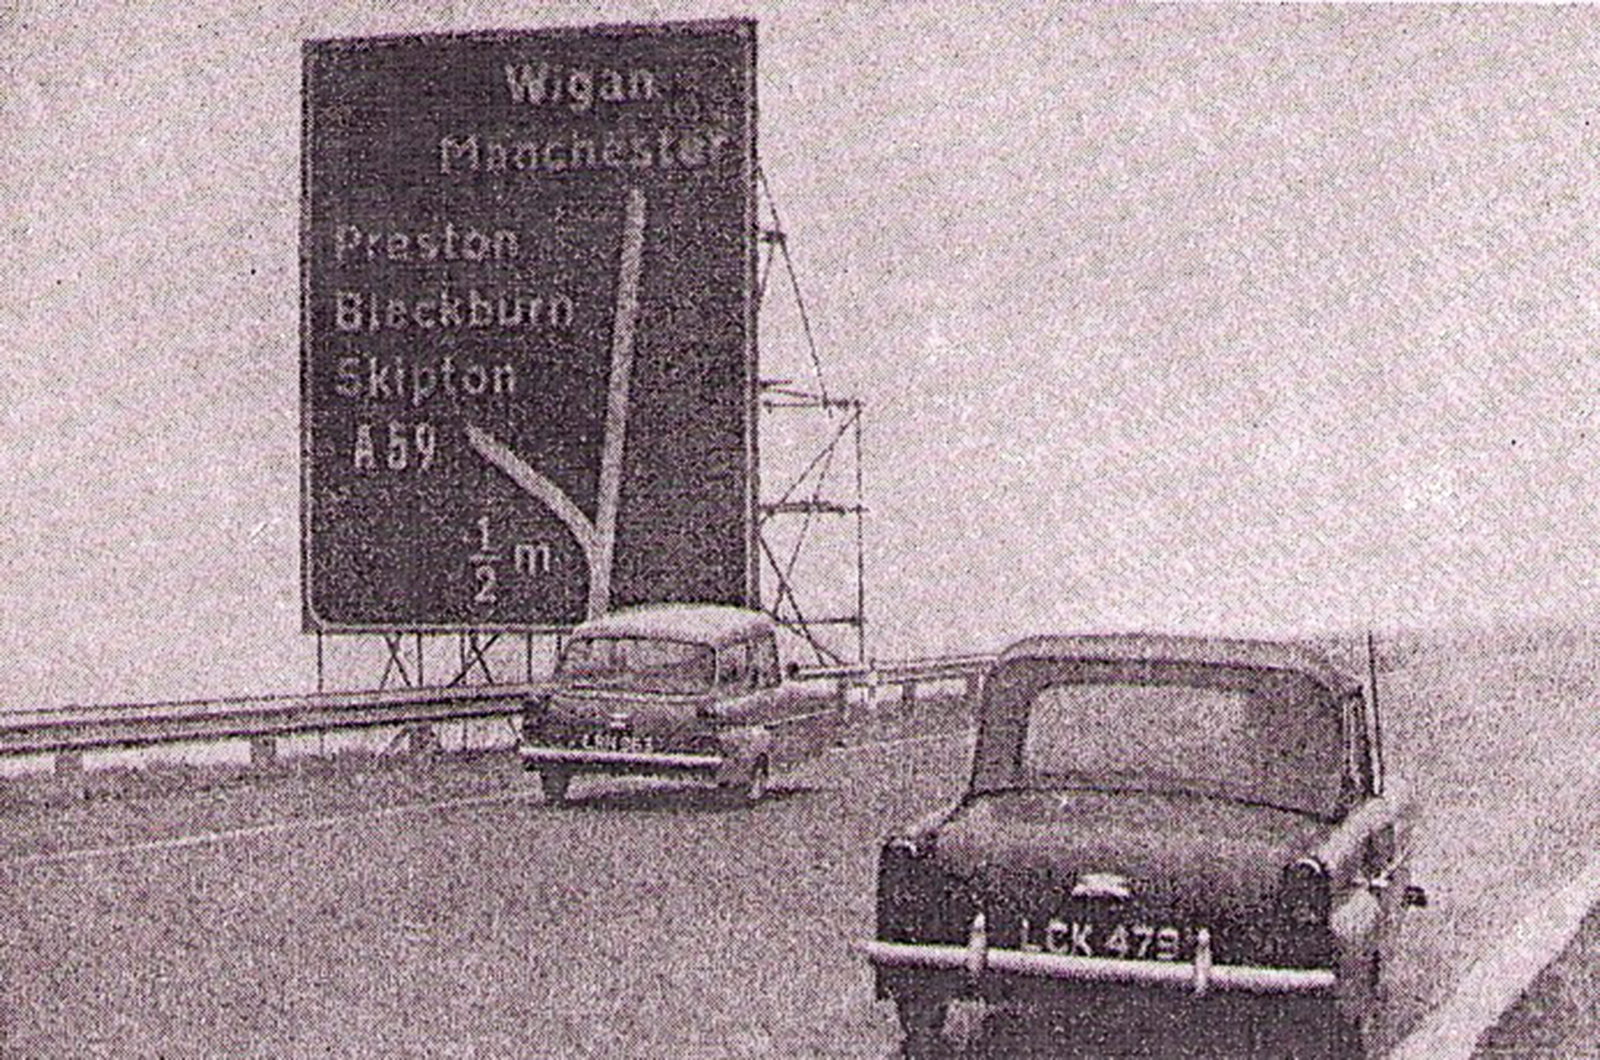 Classic & Sports Car – How the motorway made Britain